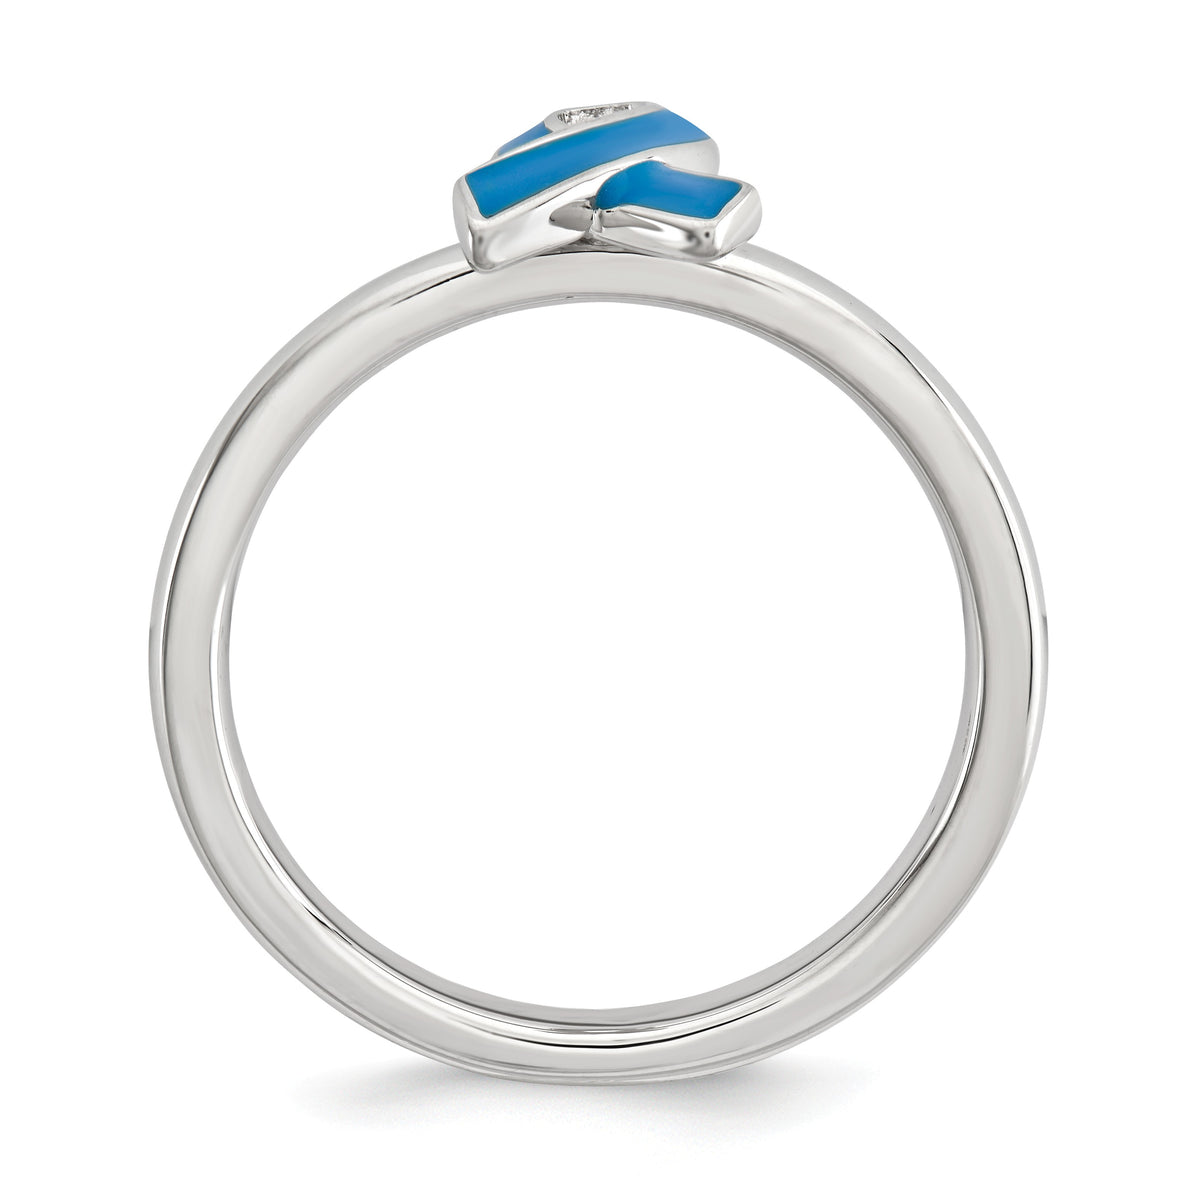 Alternate view of the Silver Stackable Blue Enamel Awareness Ribbon Ring by The Black Bow Jewelry Co.